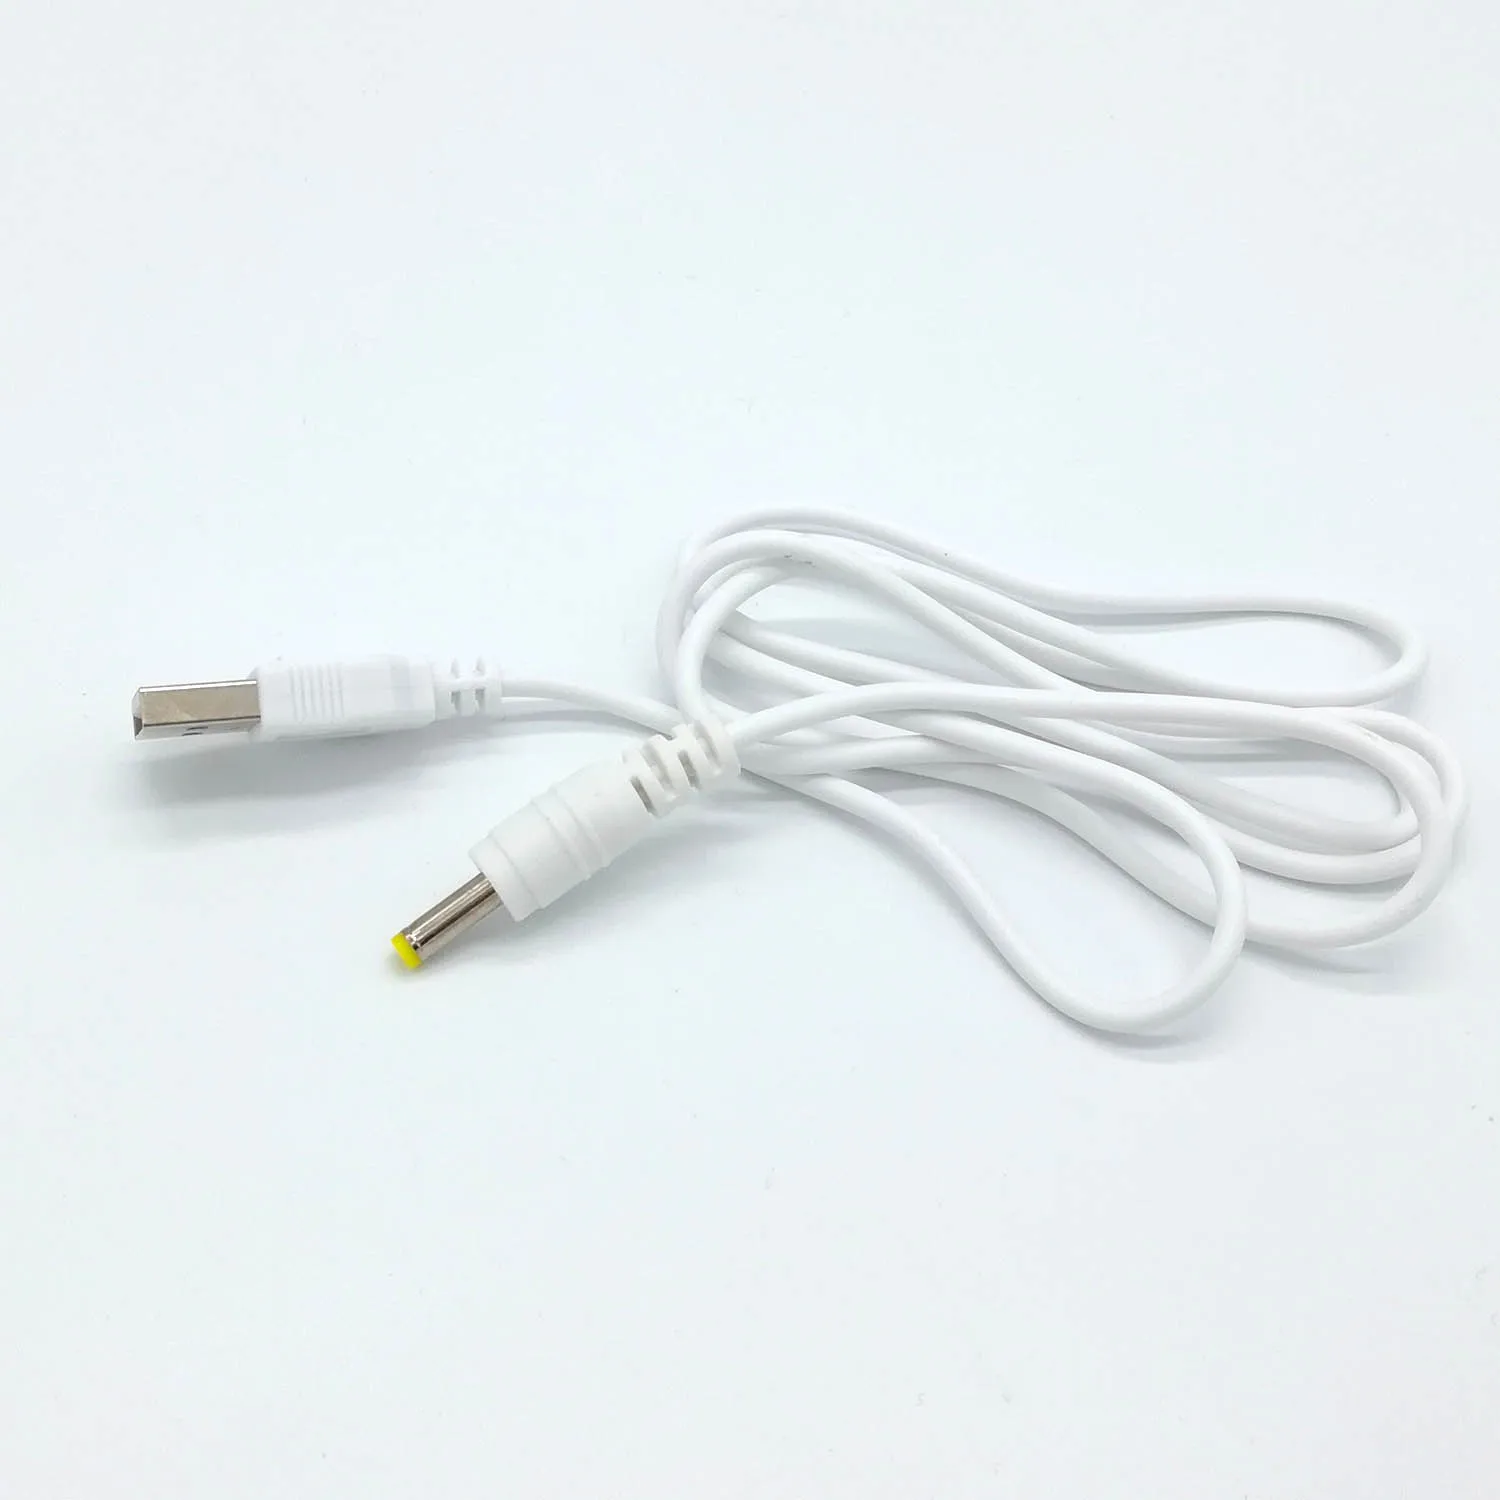 USB To DC 4.0x1.7 mm Power Charging Charger Cable Supply For Sony PSP gm images - 6